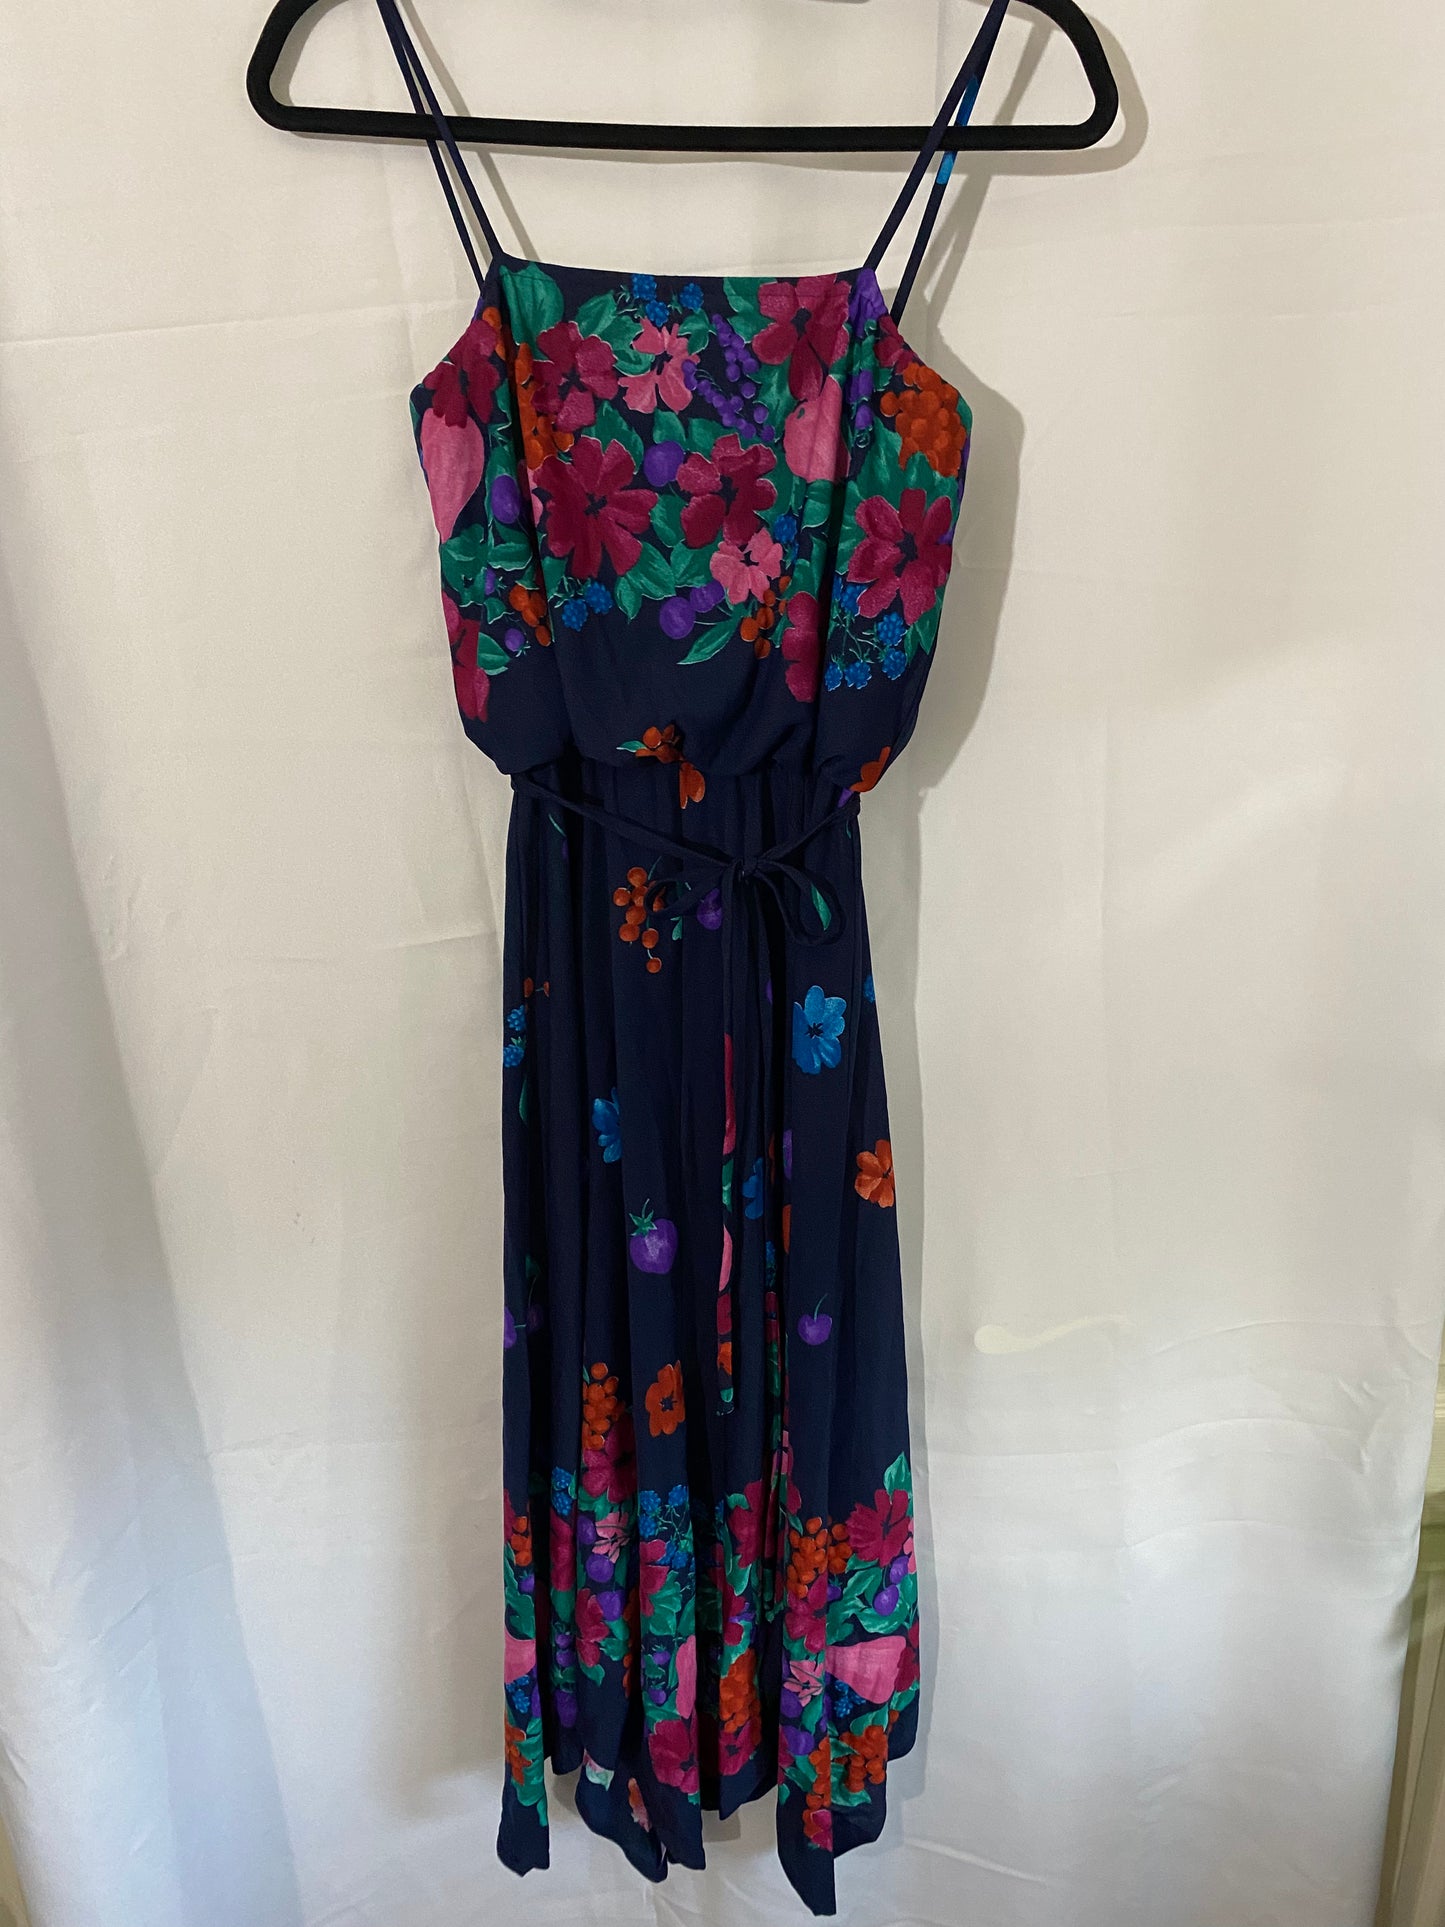 1960's Navy Dress with Purple, Pink, Red/Green Floral Pattern